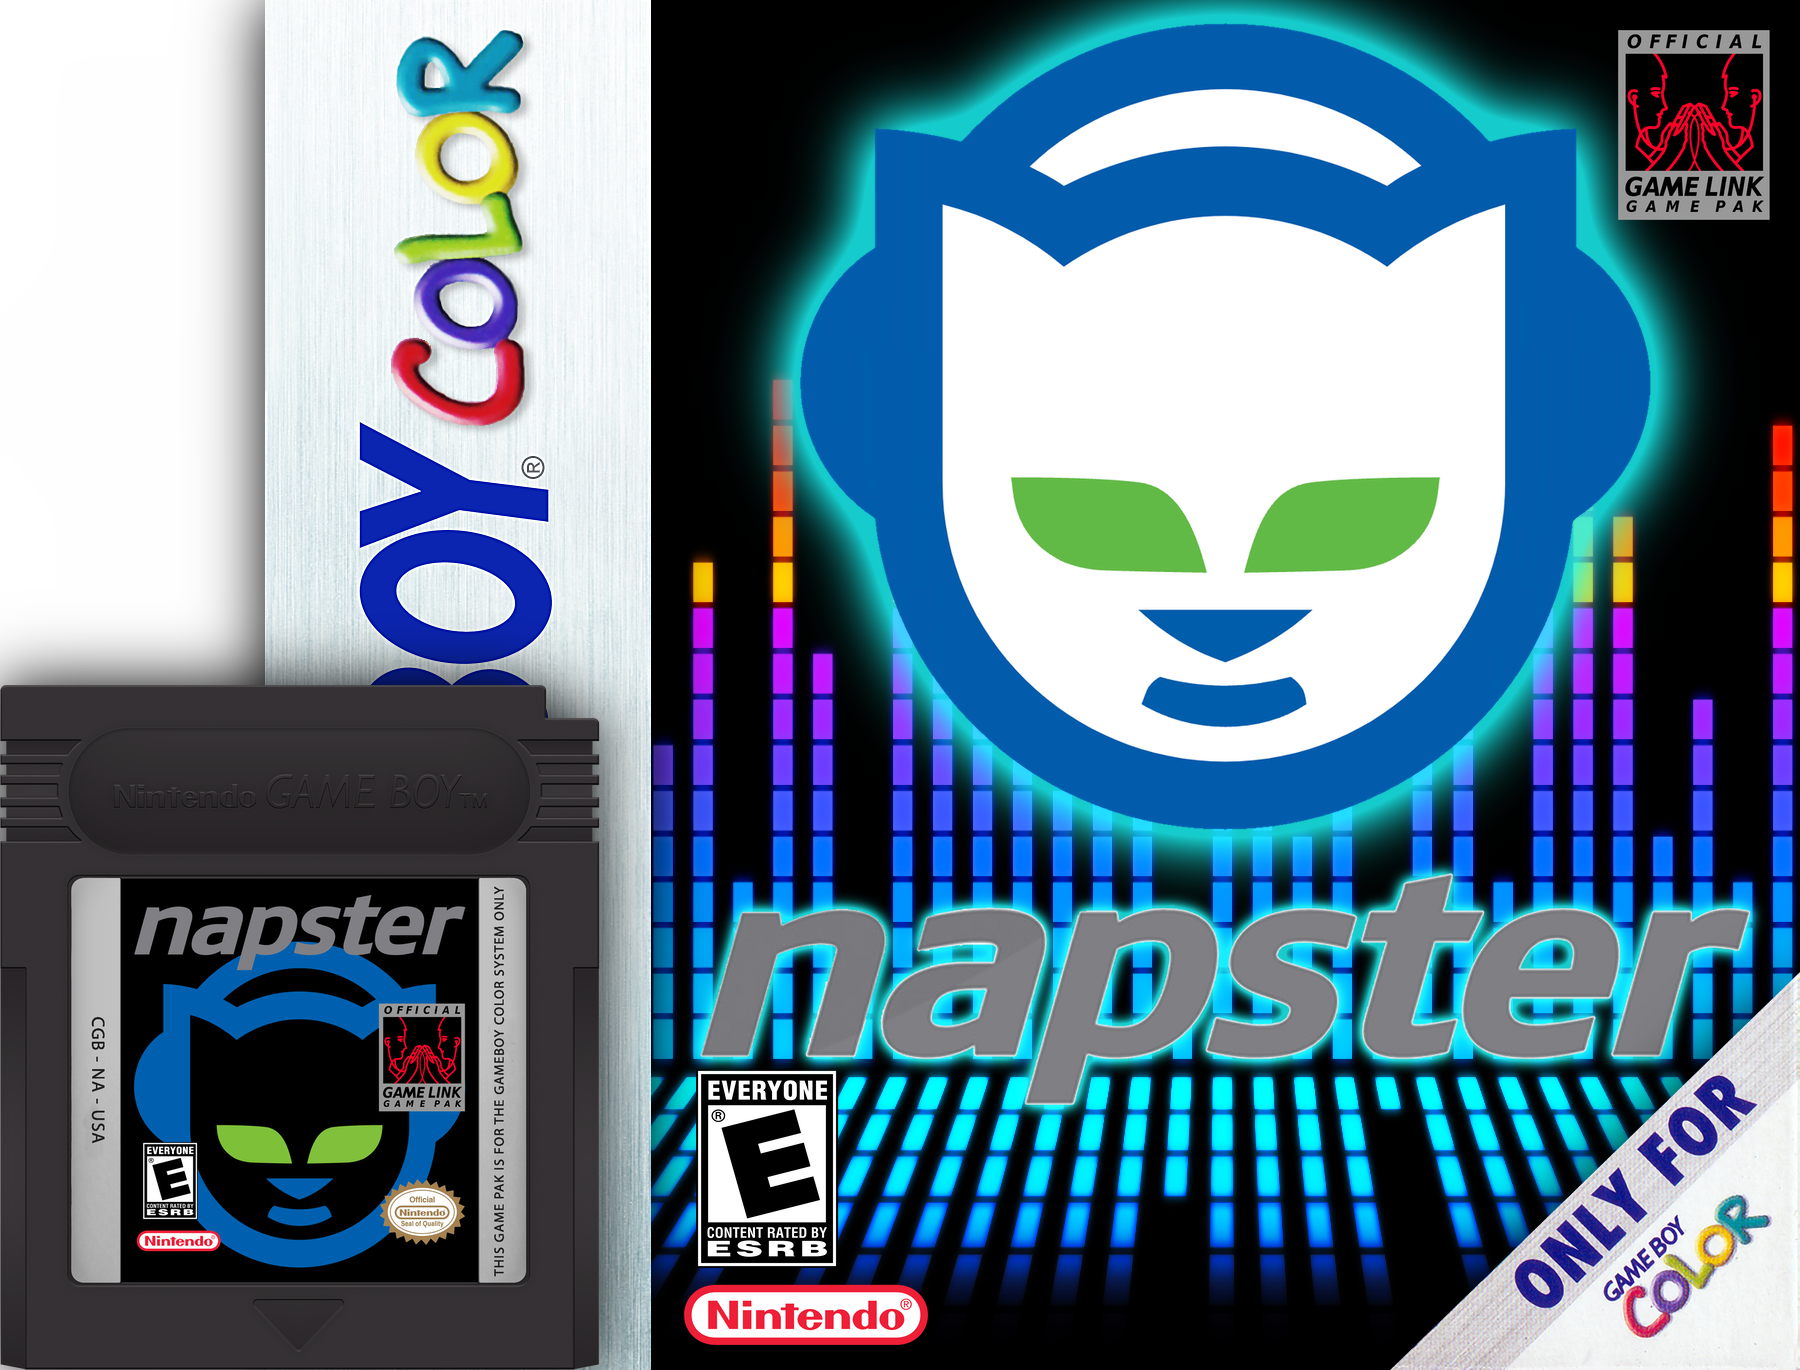 Napster for the Game Boy Color; box & cartridge